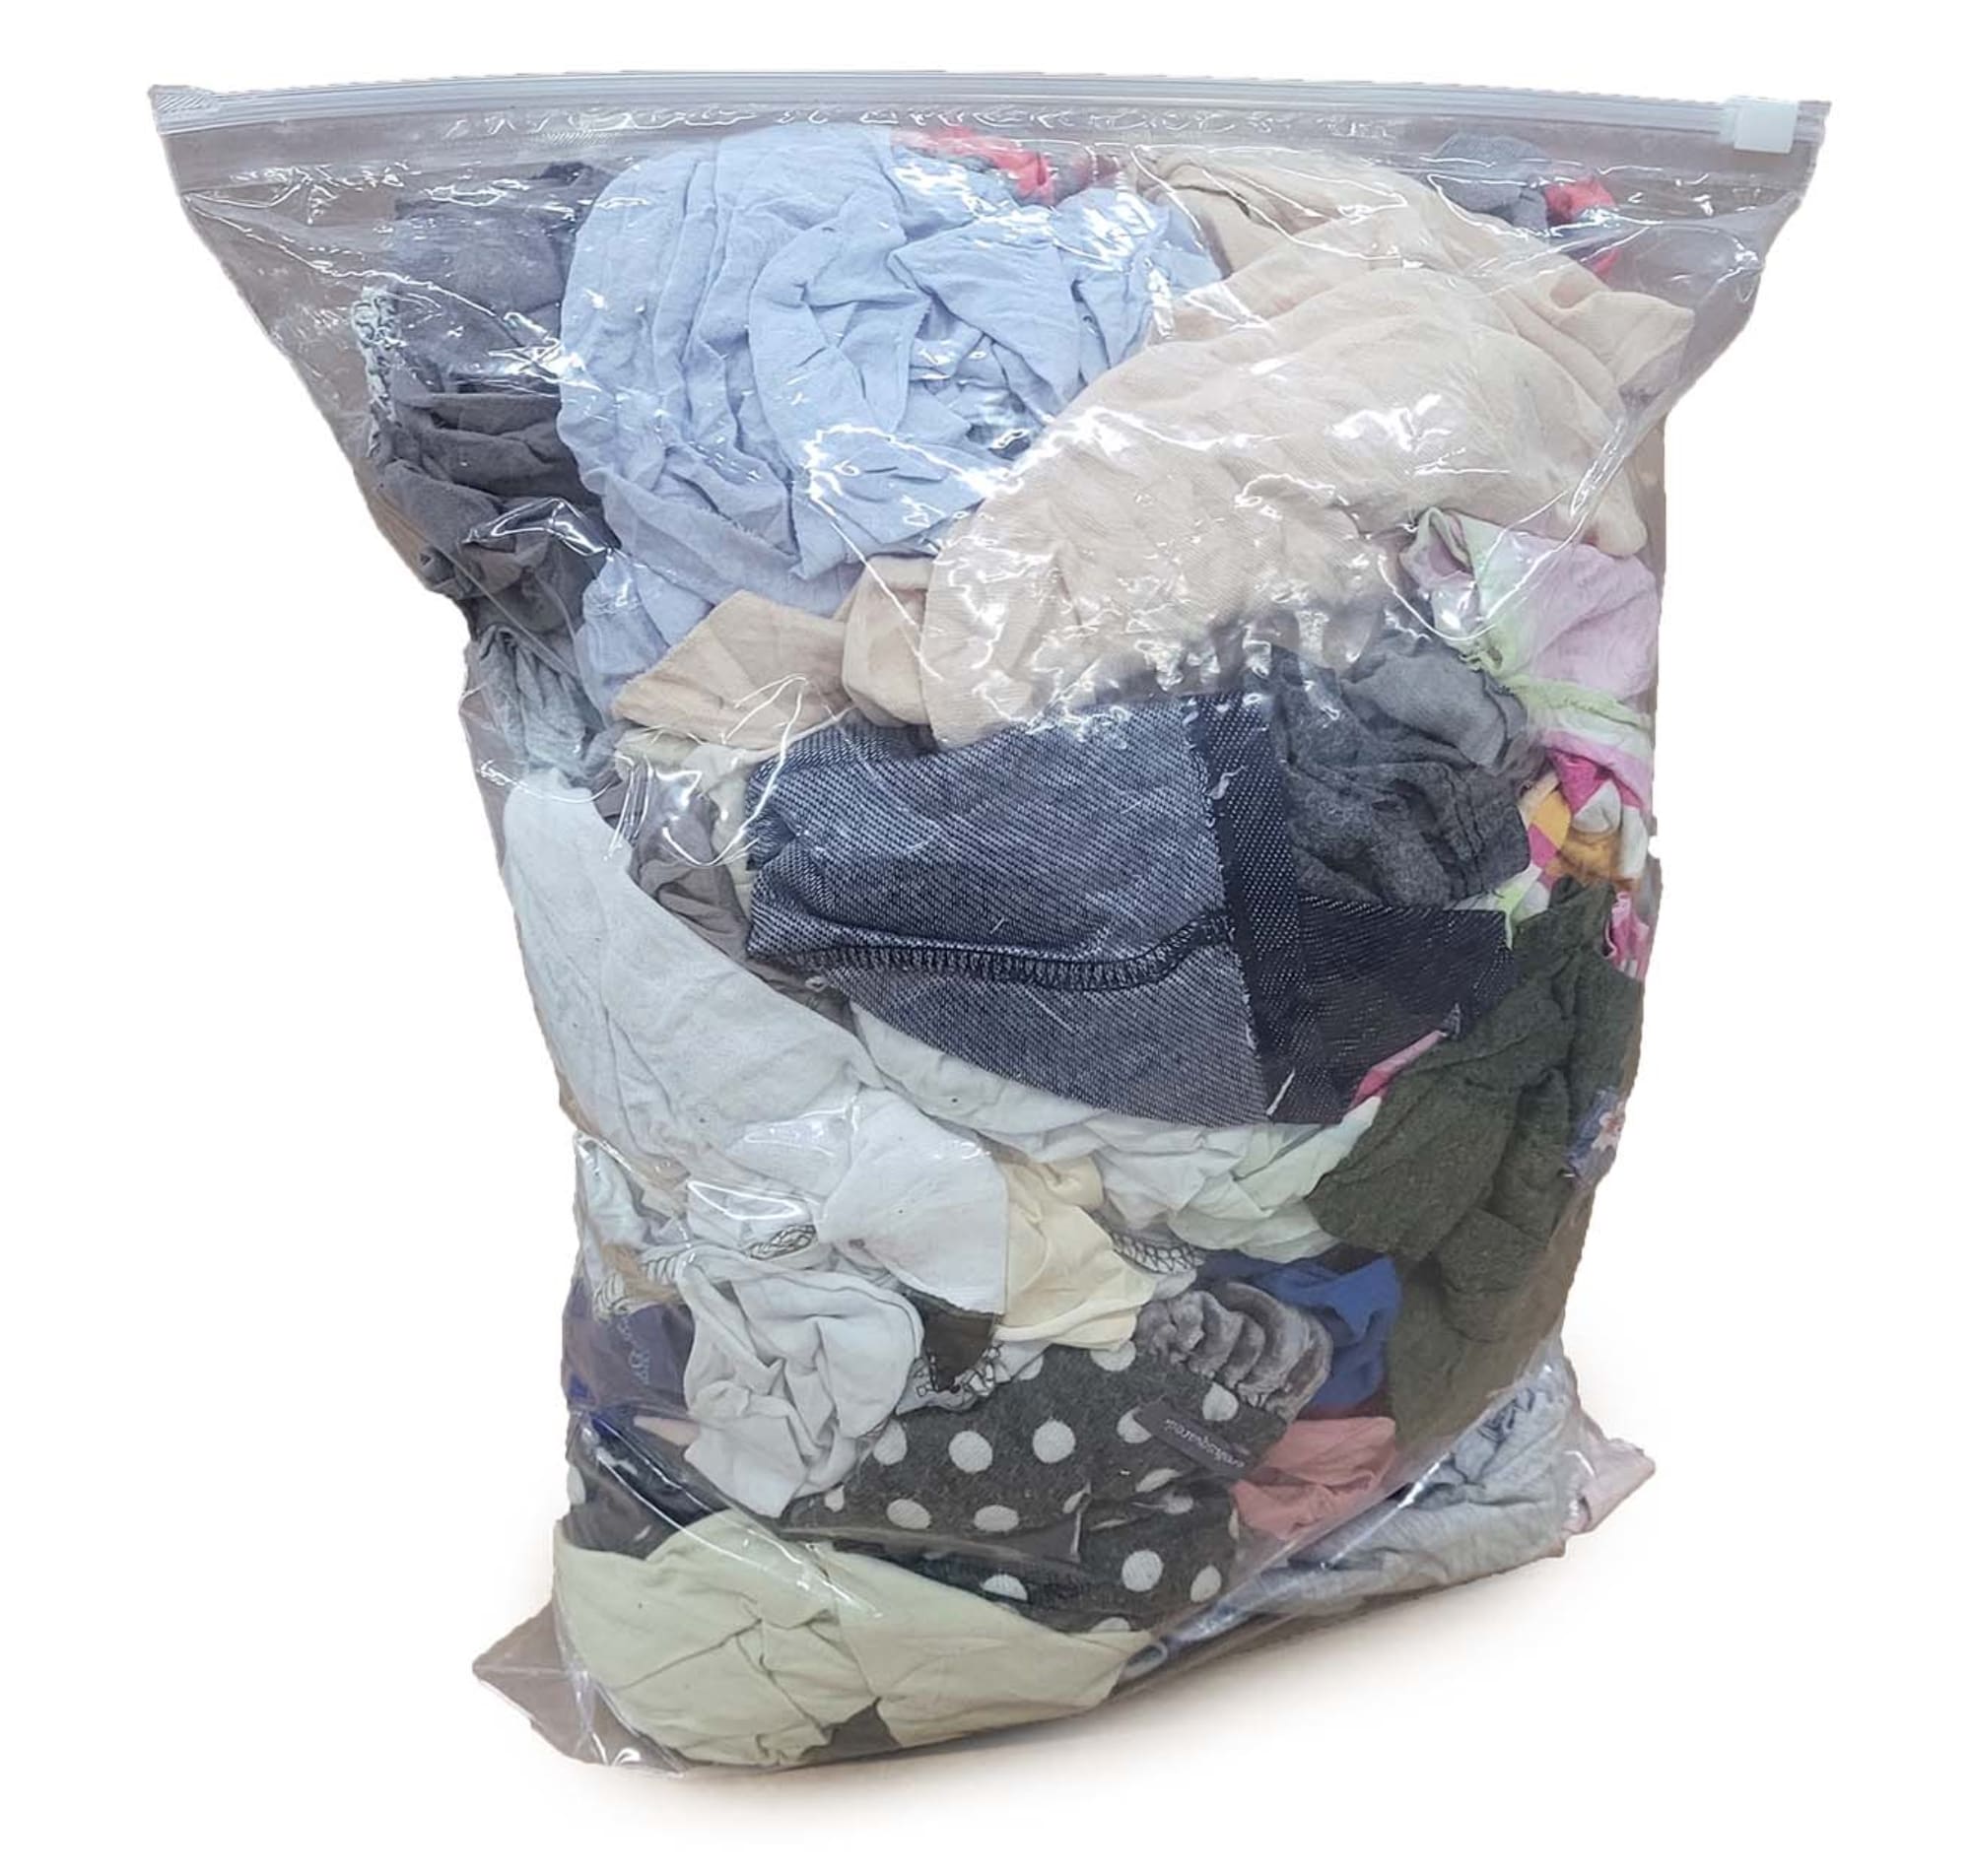 Mwipes Bag of Cleaning Rags (4lbs)